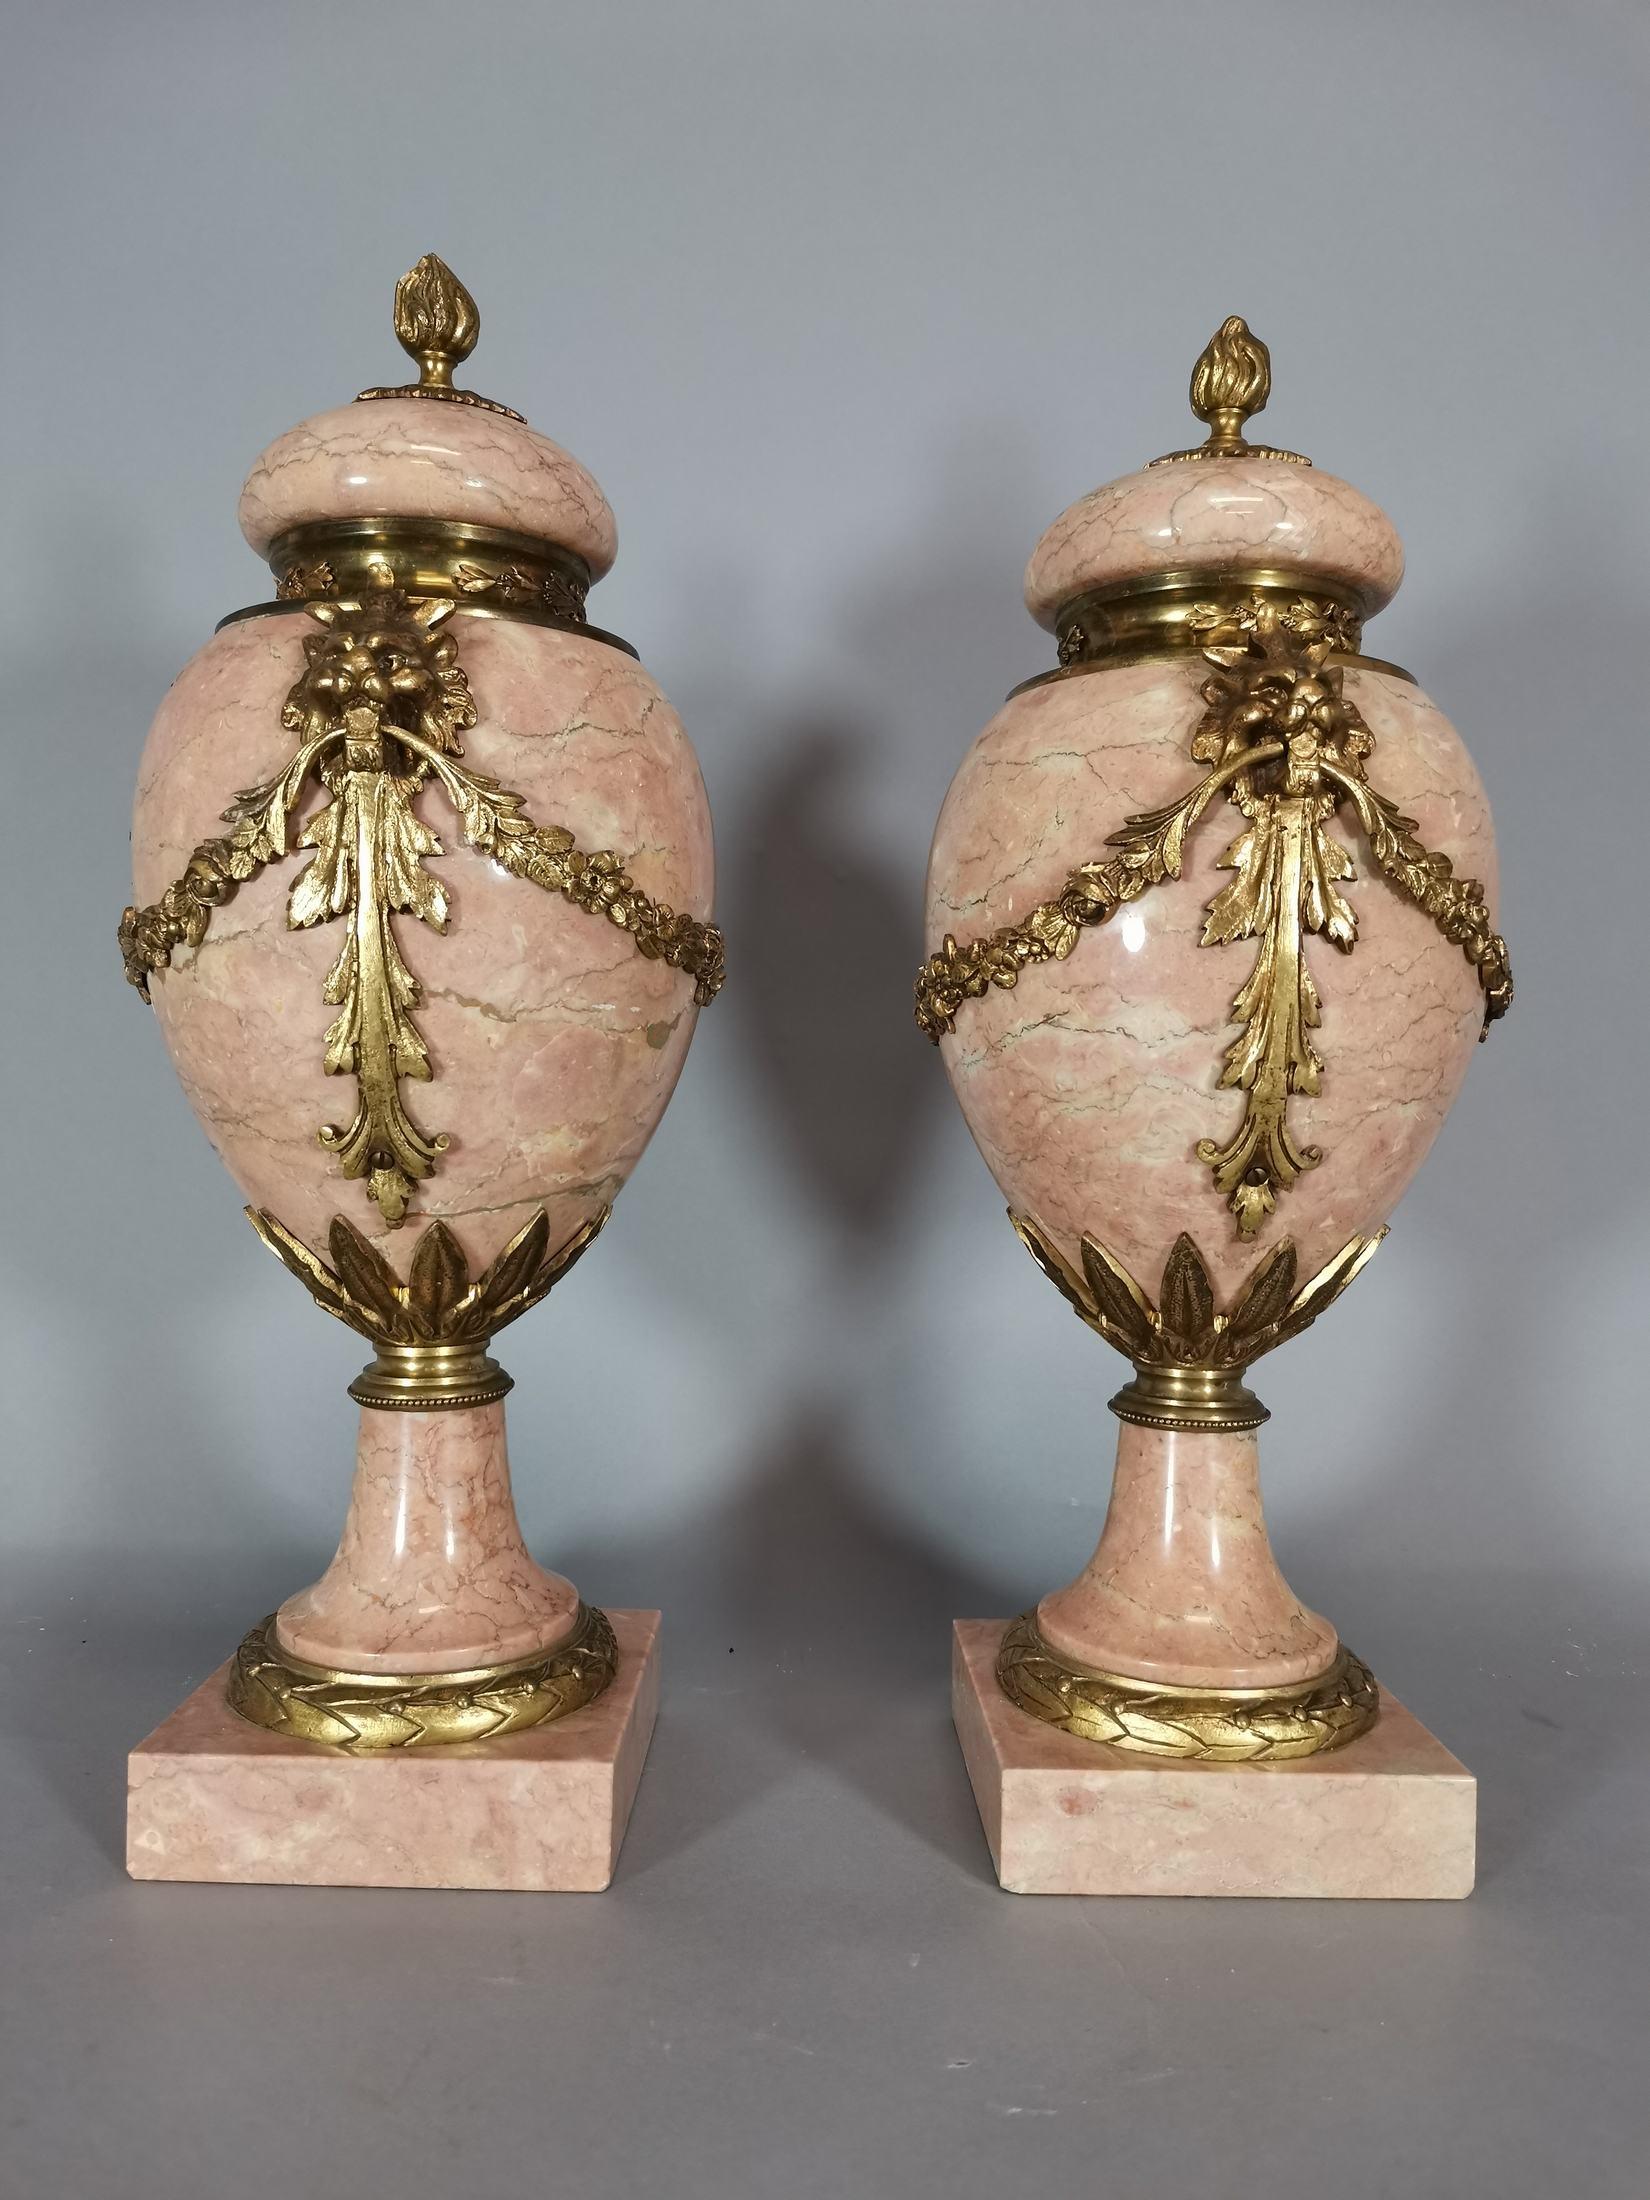 Pair of Marble and Gild Bronze Vase from the Early 1900, 20th Century For Sale 2